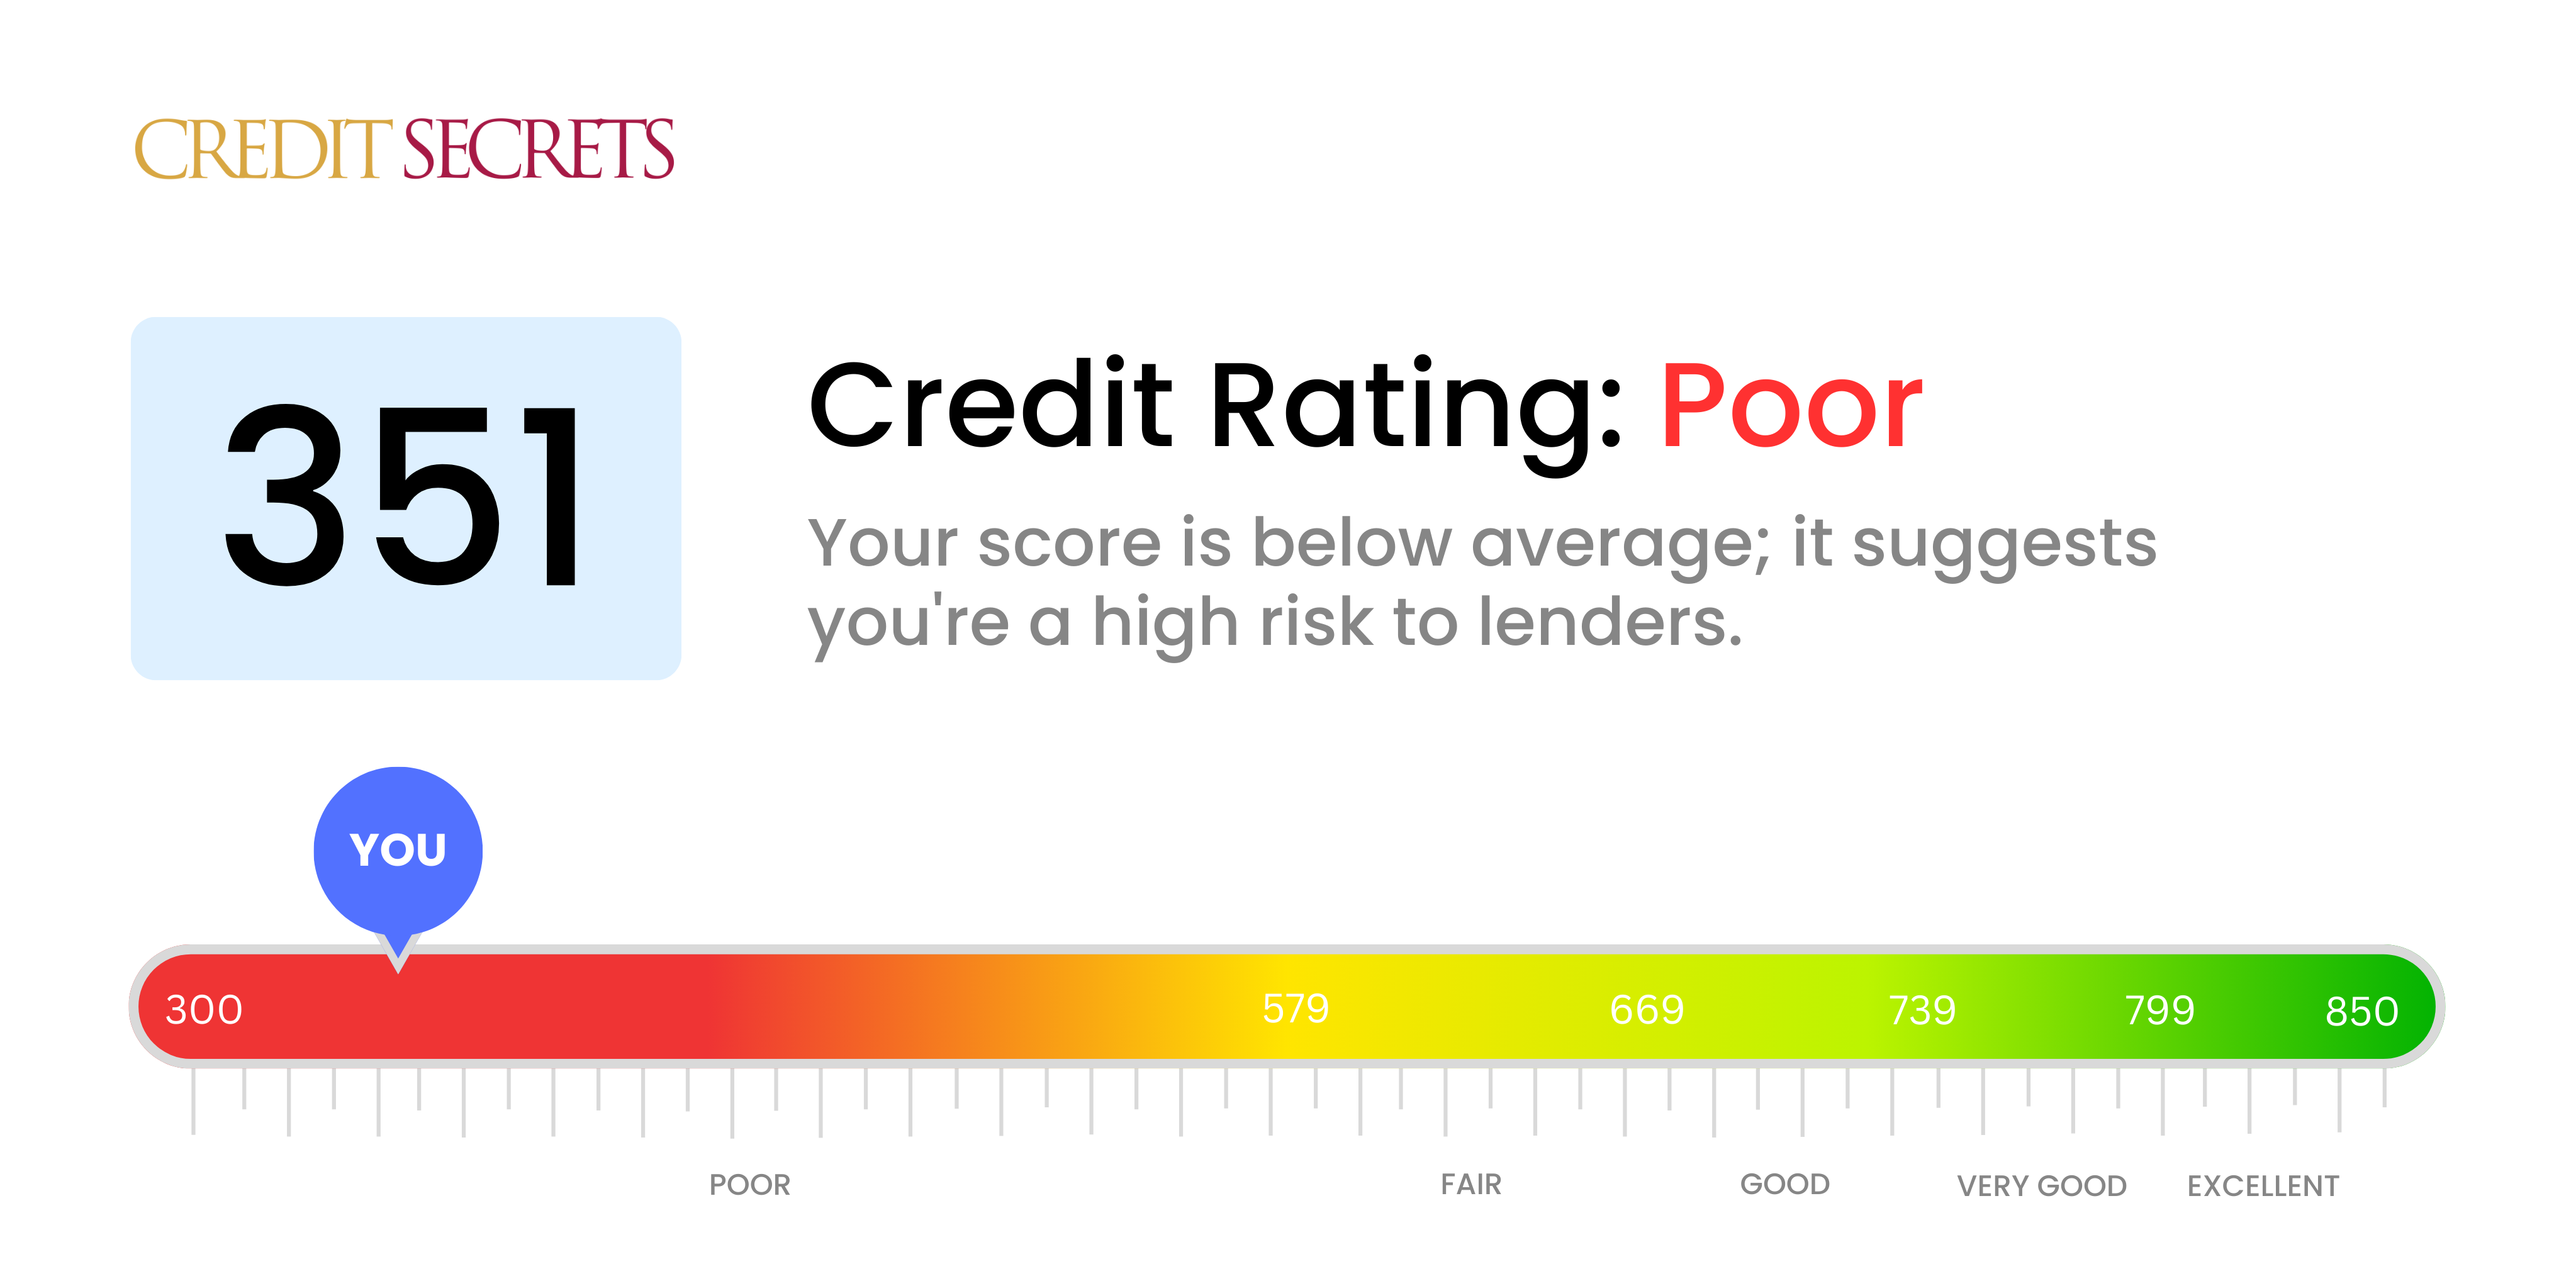 Is 351 a good credit score?